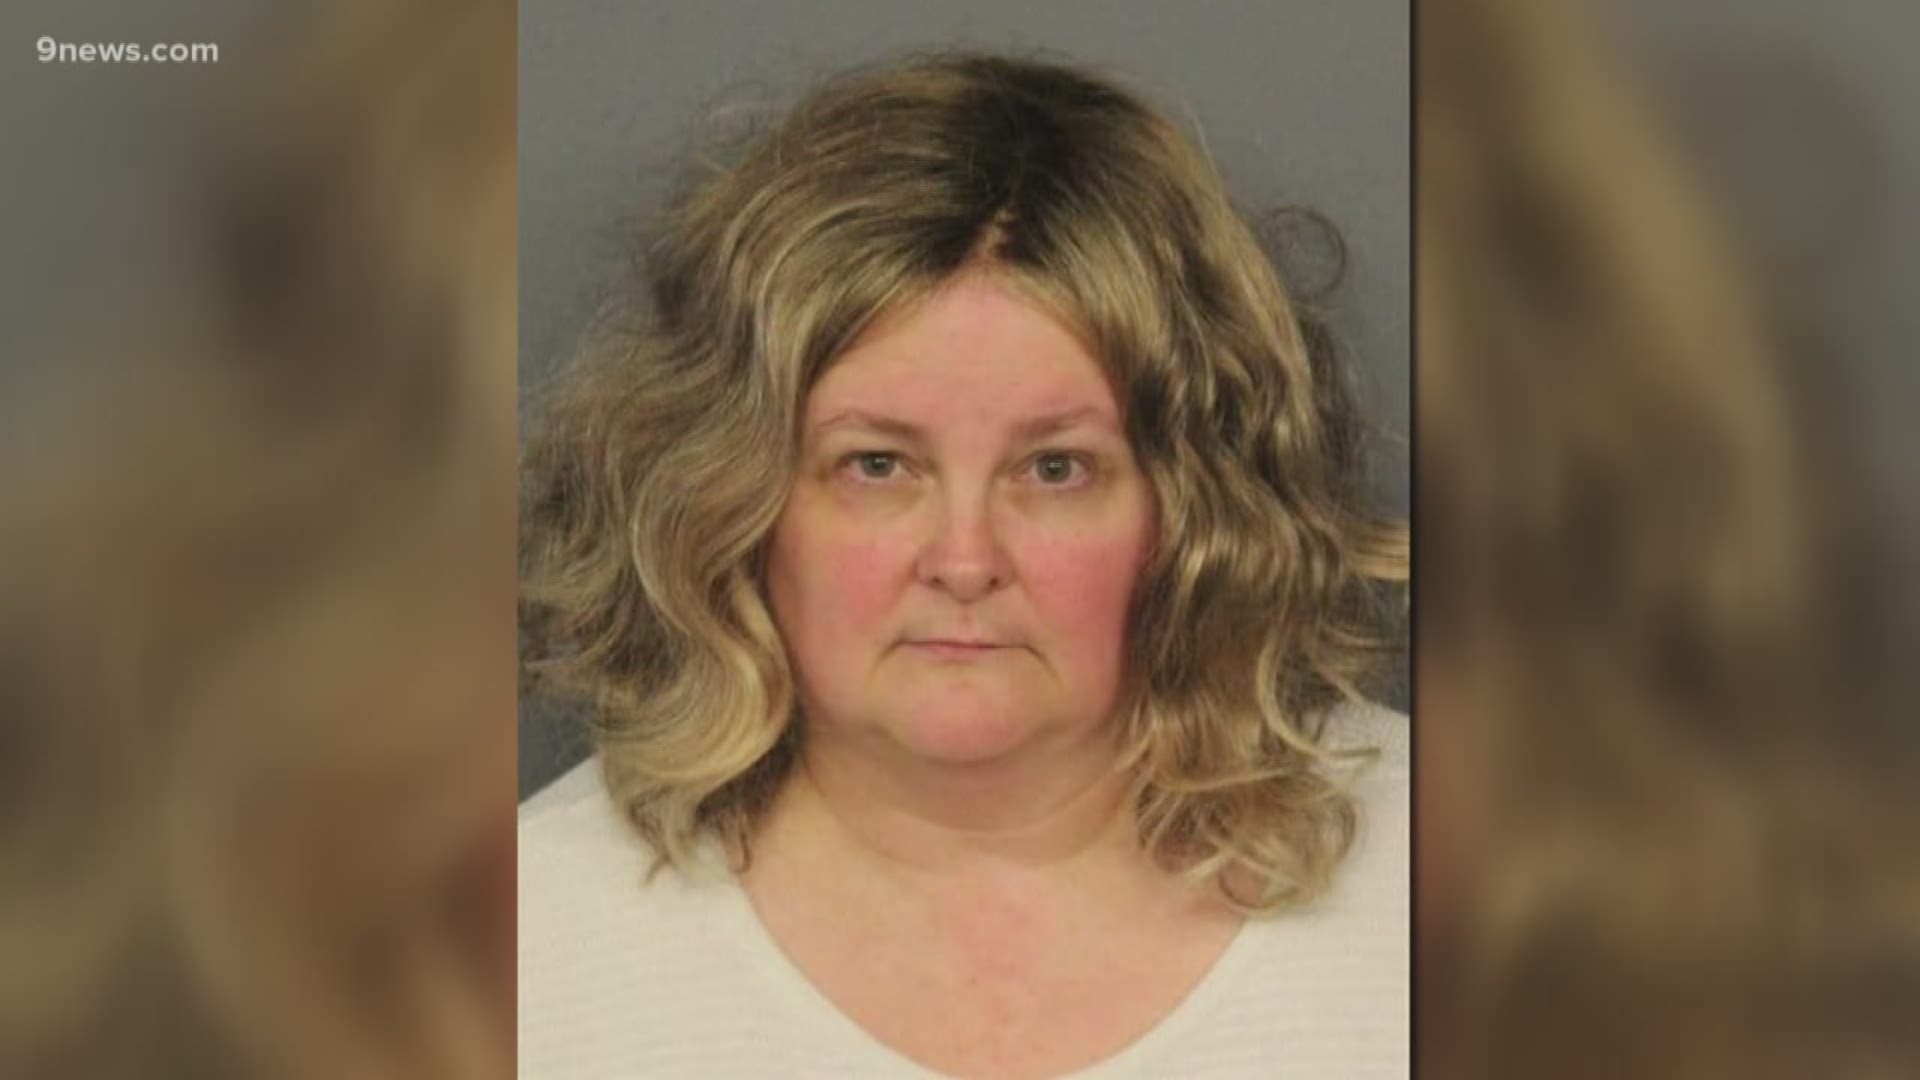 A woman who served as the treasurer of a Parent Teacher Organization (PTO) for five years in Denver has been charged with theft, according to the Denver District Attorney's Office.